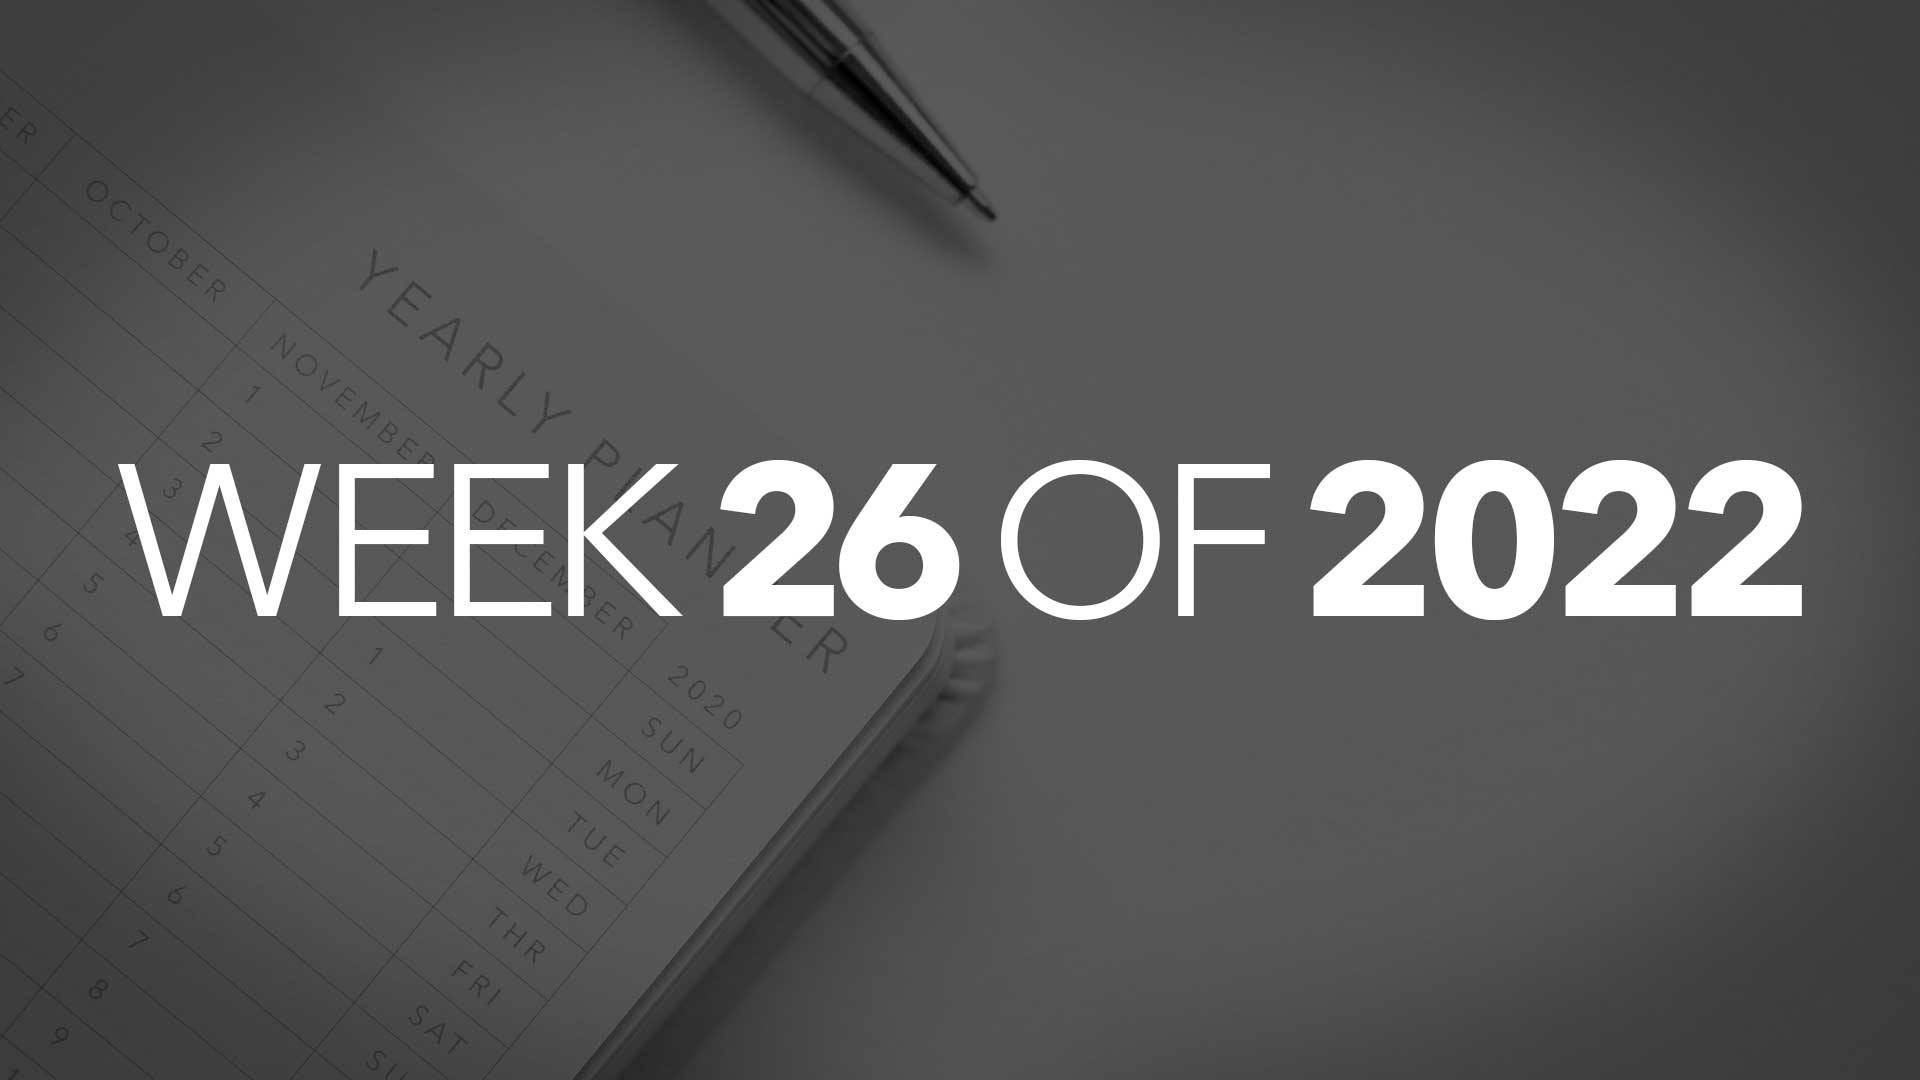 List of National Days for Week 26 of 2022